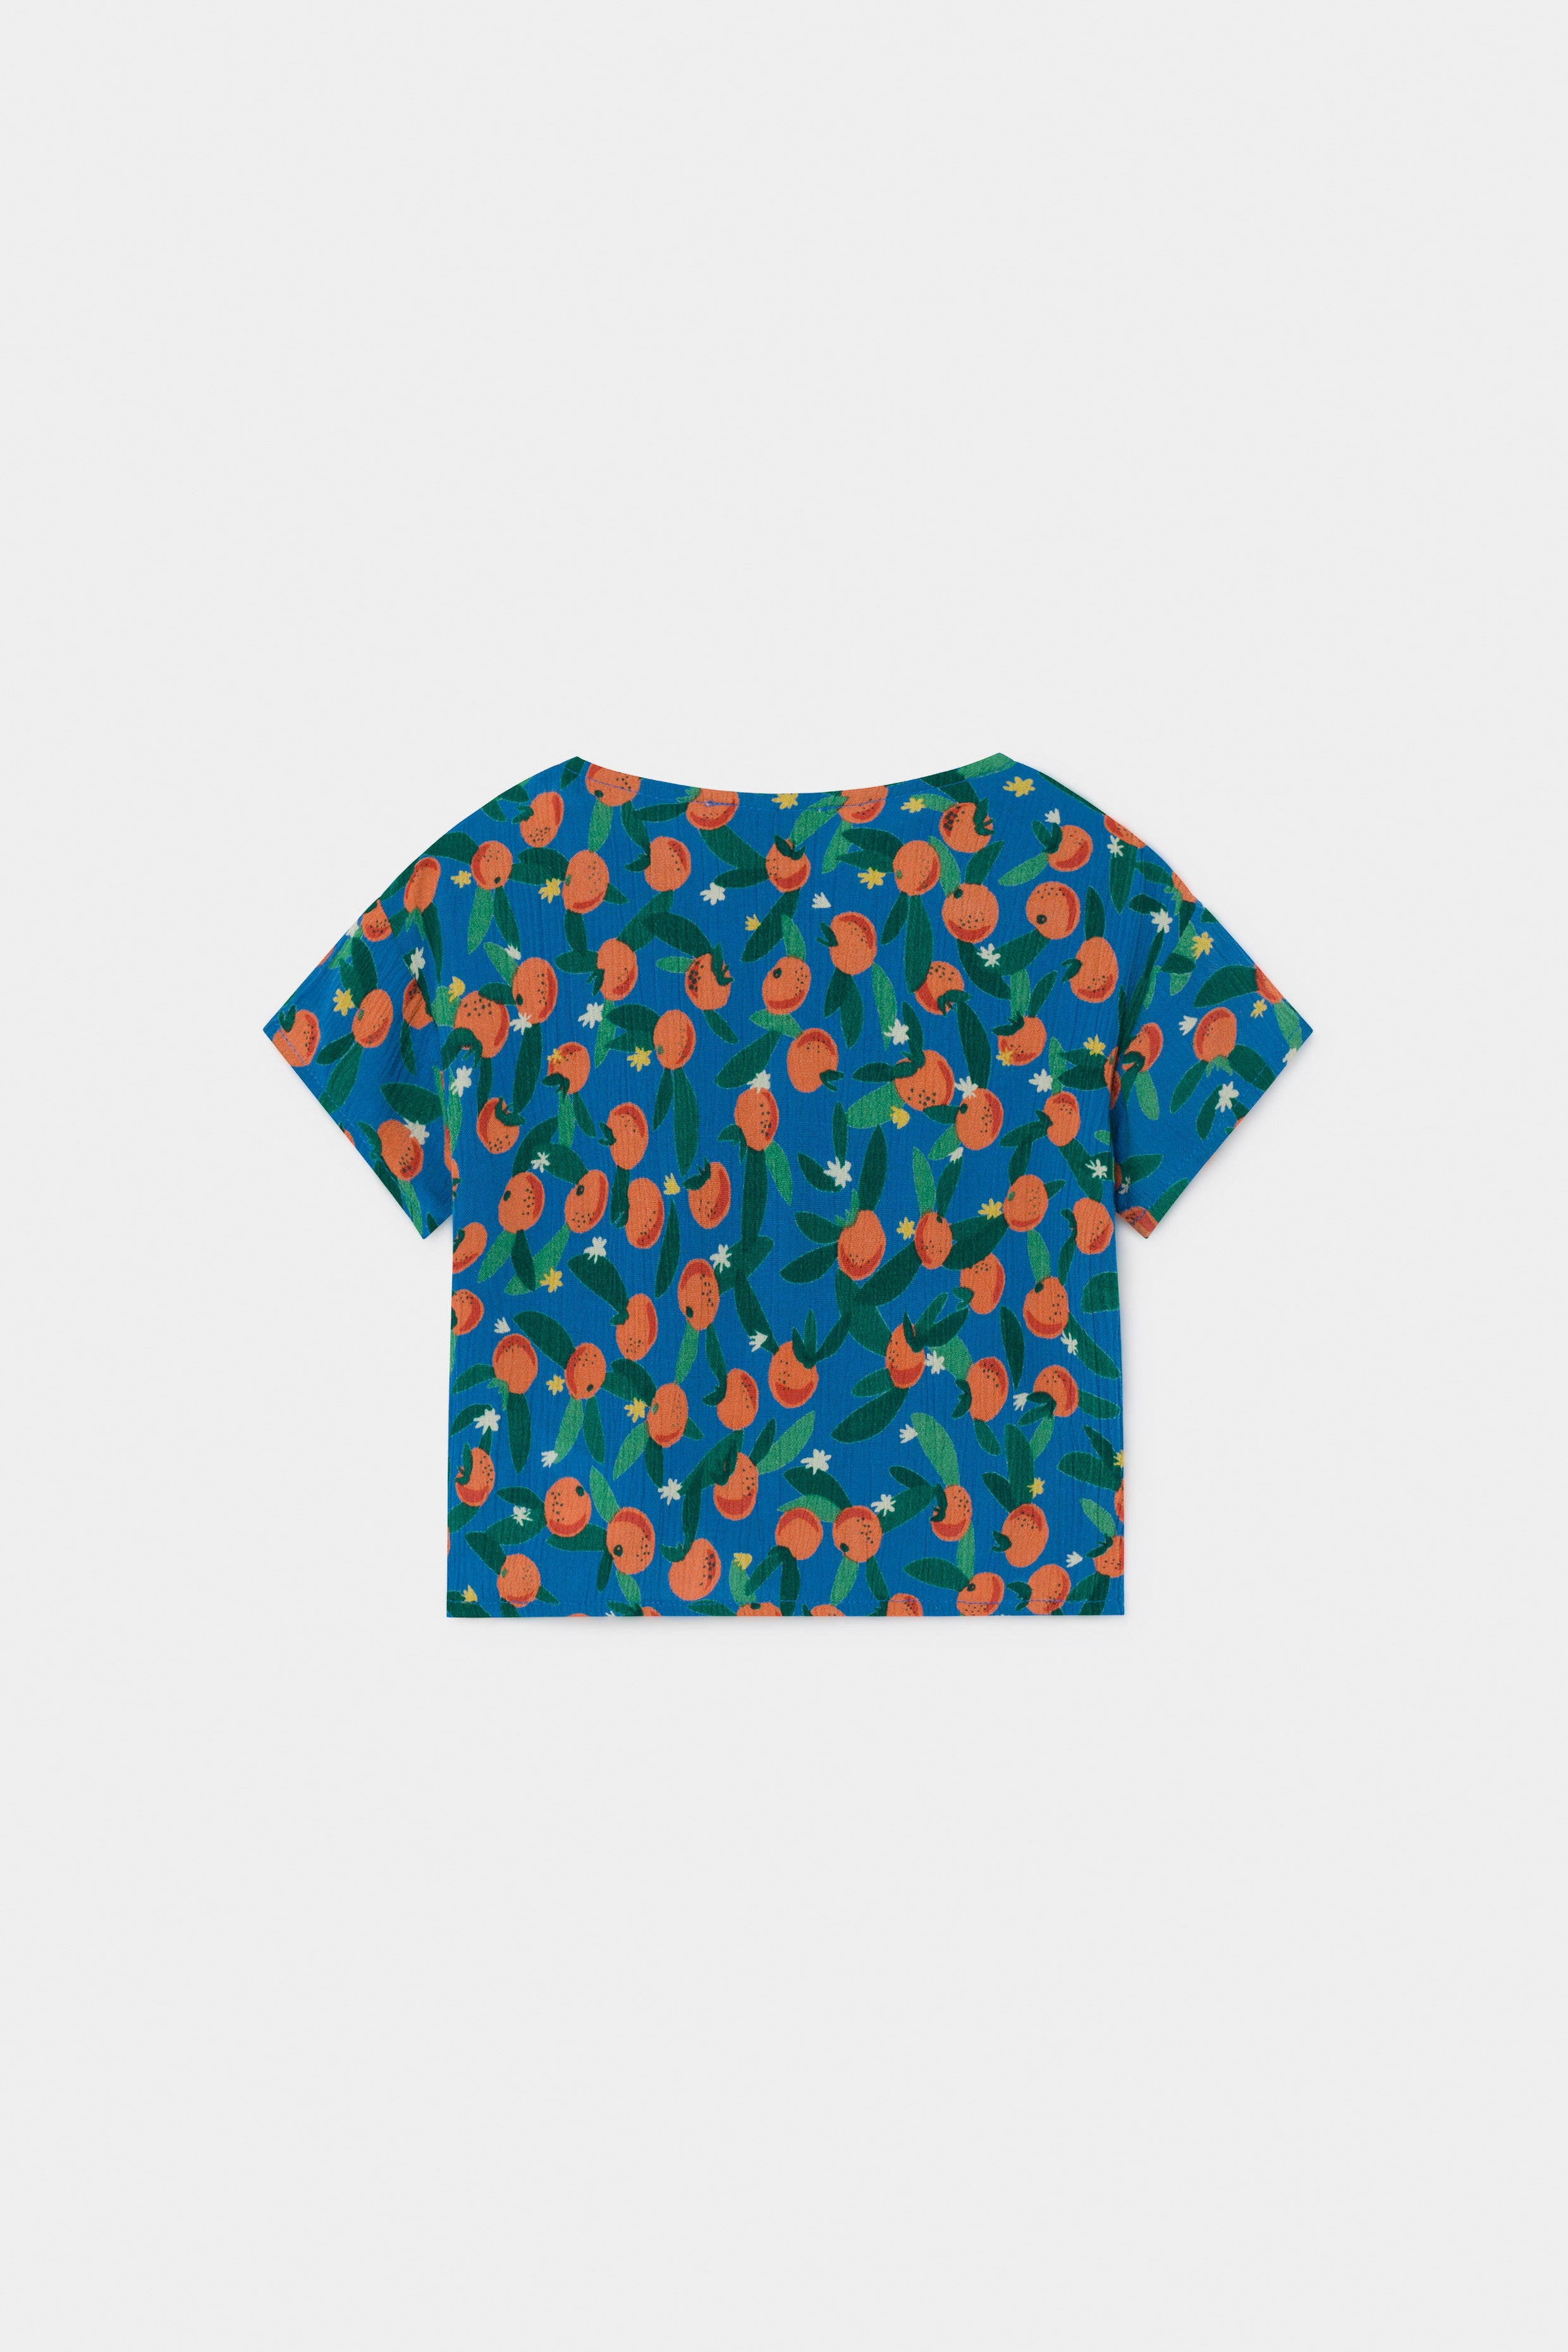 Bobo Choses All Over Oranges Blouse